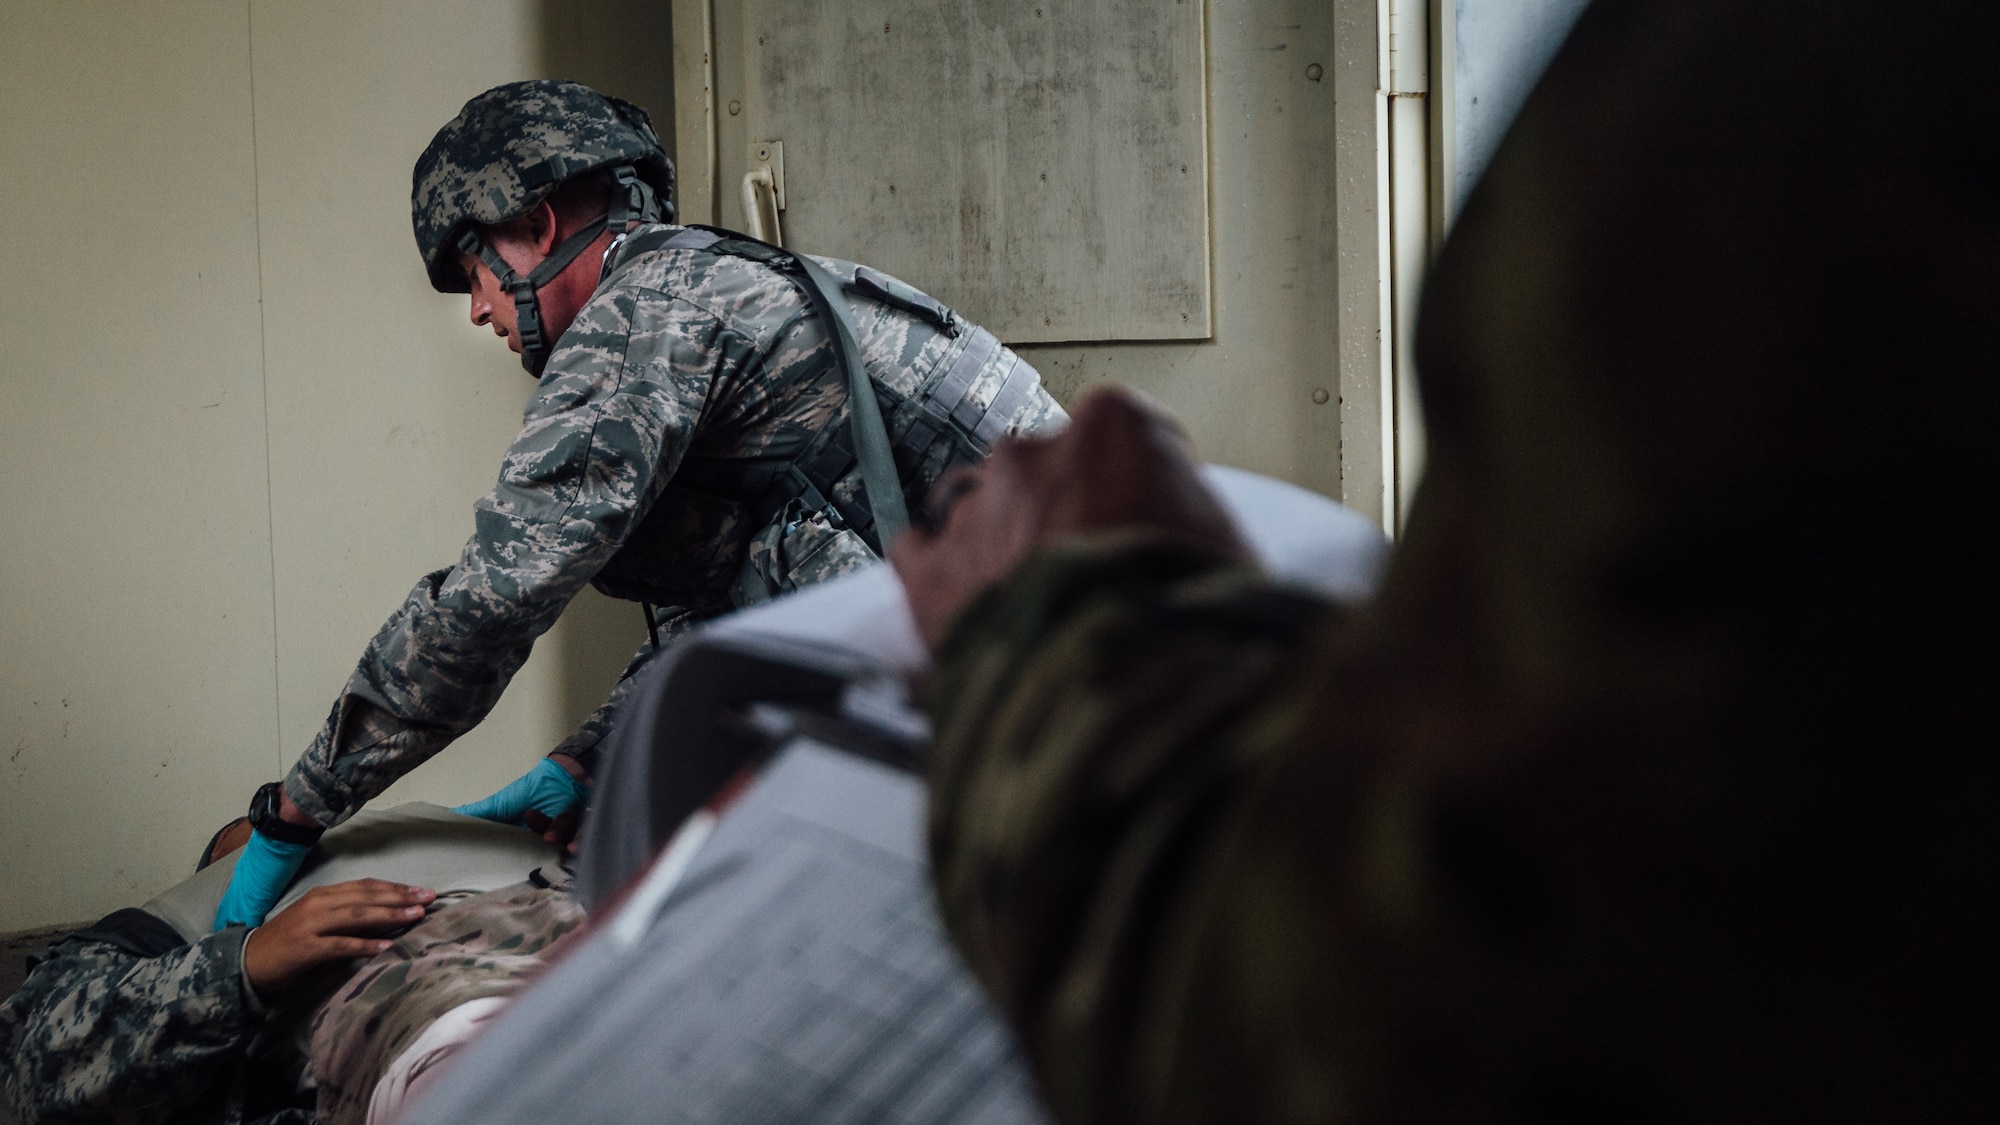 Capt. Ryan Garabrandt, 446th Aeromedical Staging Squadron Expert Field Medic Badge candidate, provides medical care to an injured simulated patient during the Expert Field Medic Badge course while a cadre grades him at Joint Base Lewis-McChord, Wash., Sept. 25, 2015. The EFMB is the non-combat equivalent of the Combat Medical Badge and is awarded to medical personnel of the U.S. military who successfully complete a set of qualification tests. (U.S. Air Force photo by Senior Airman Jordan Castelan/Released)